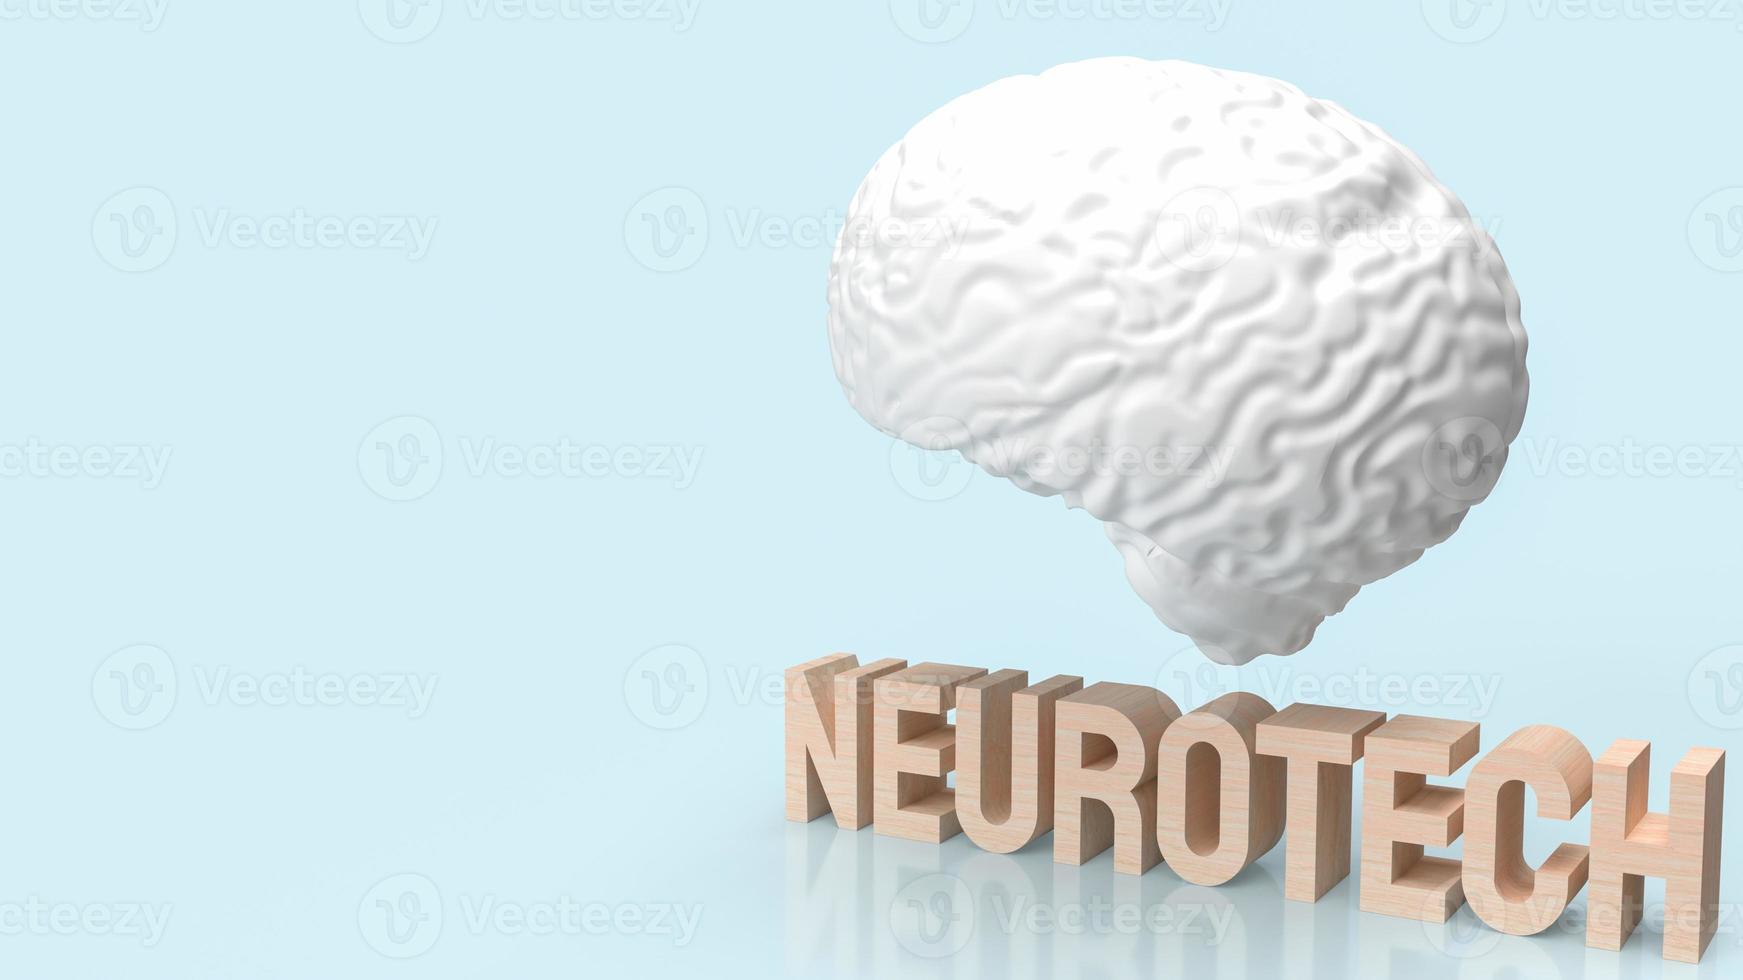 The white brain and wood text neueotech for sci or medical concept 3d rendering photo